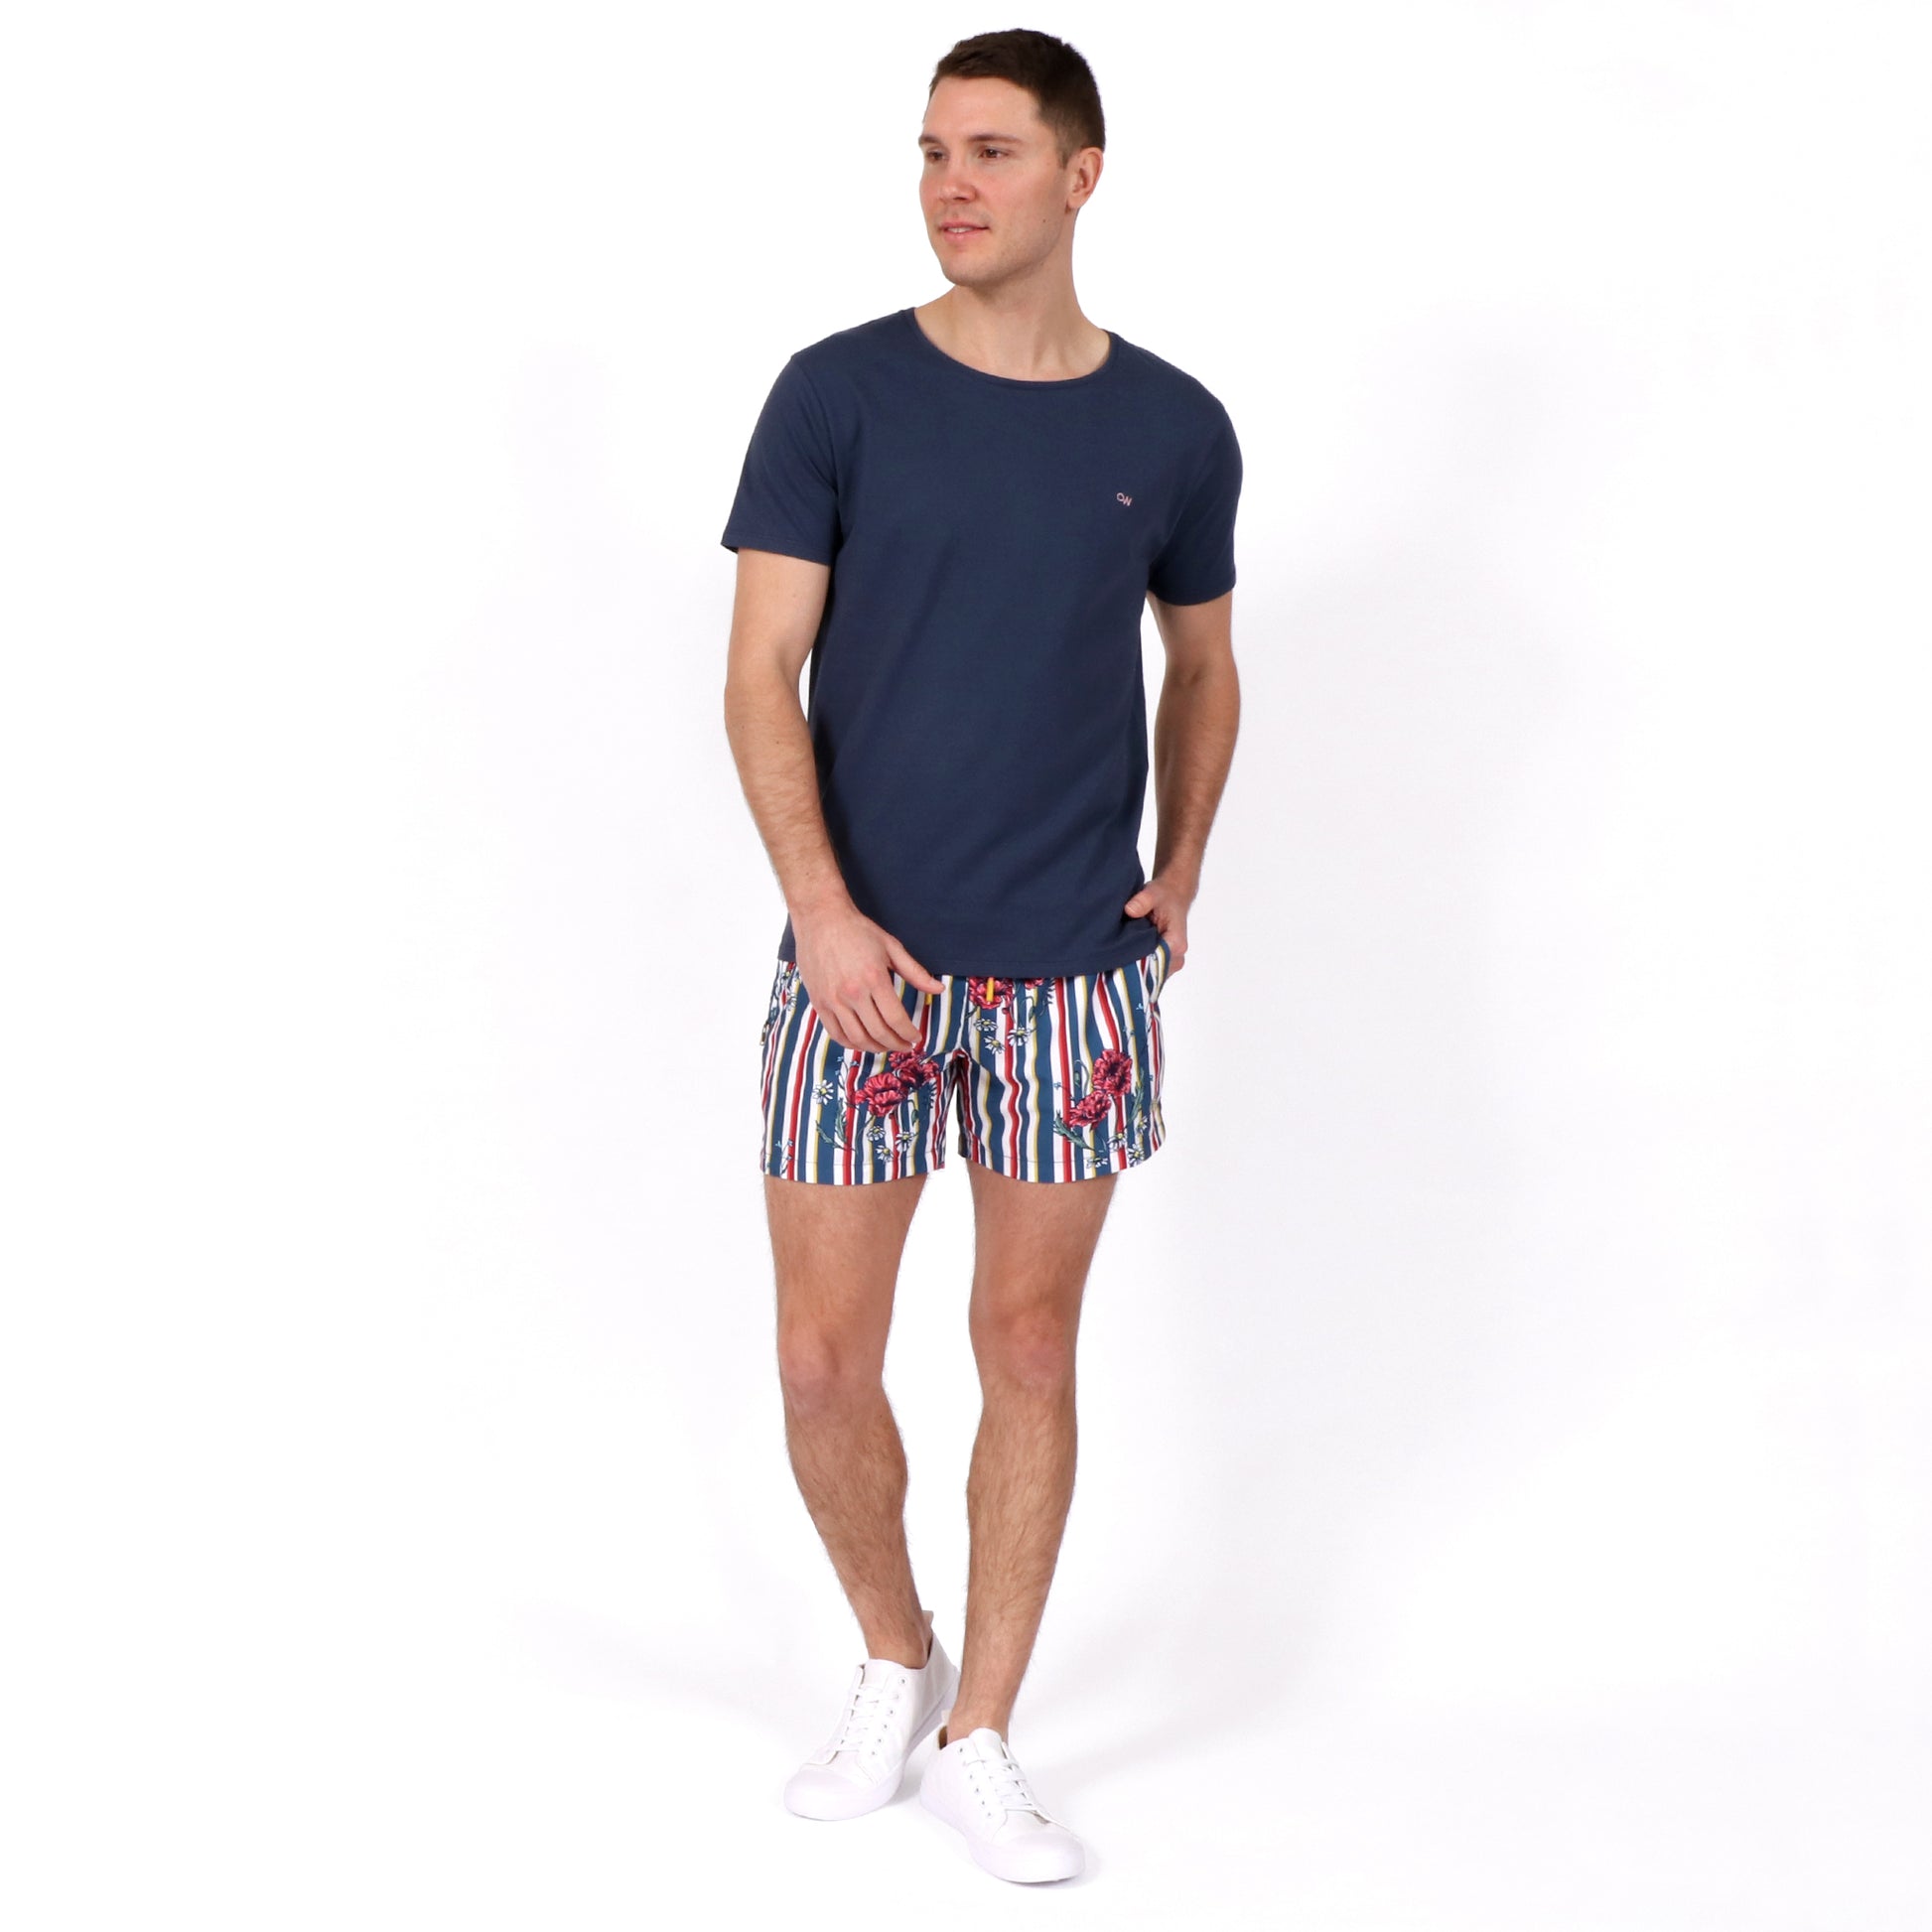 OWSS2104 Poppy Stripe Recycled Polyester Men's Swim Short and OWTS2102 Navy Urban T-Shirt Outfit